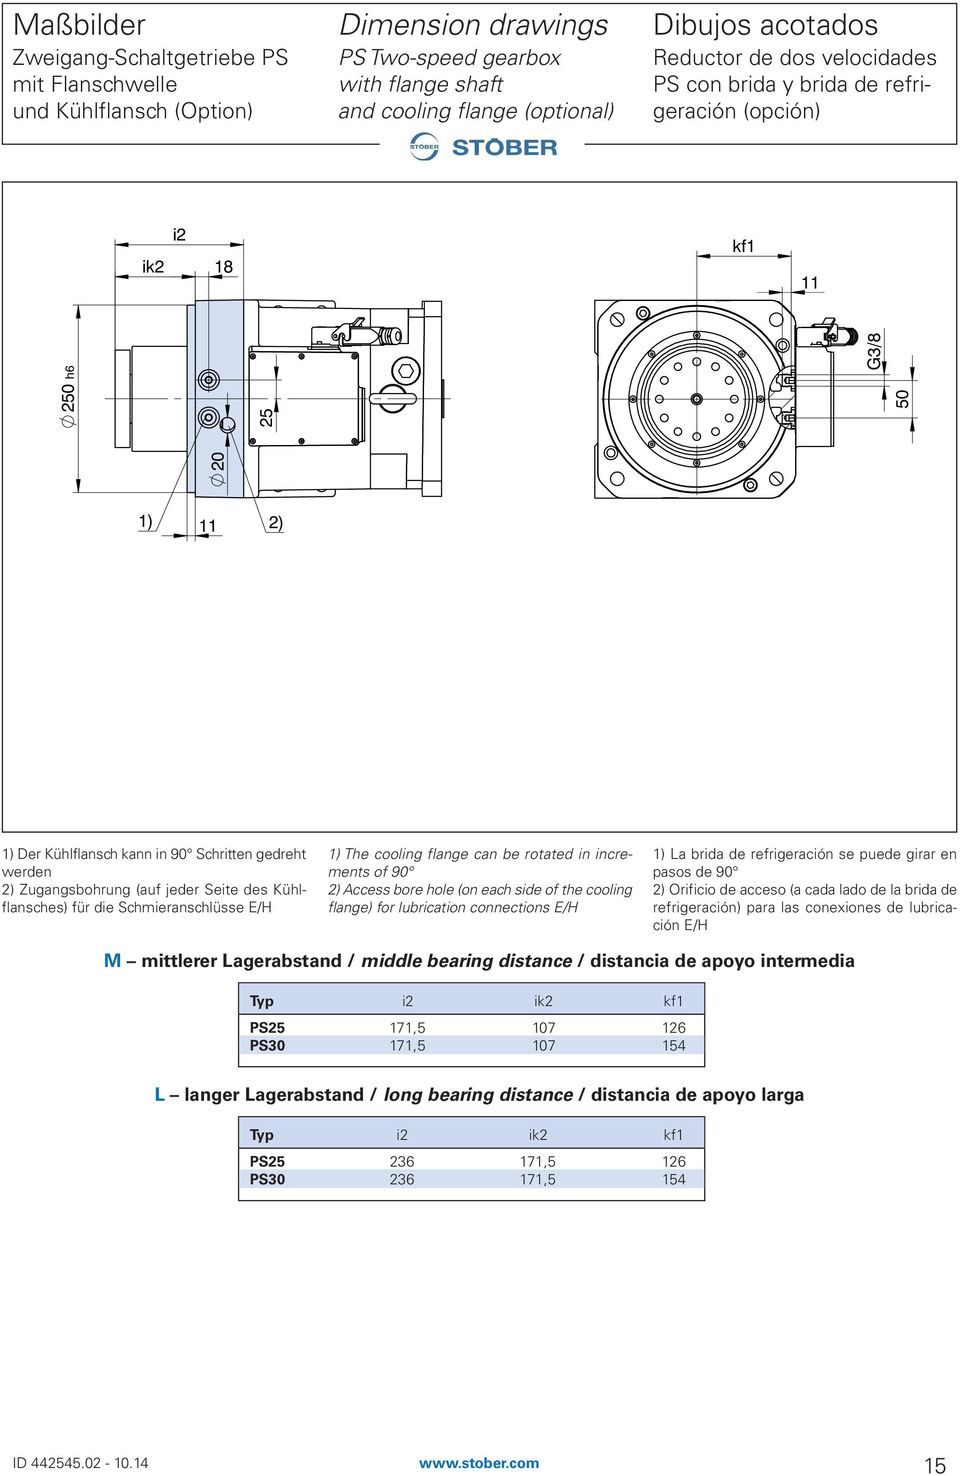 Kühlflansches) für die Schmieranschlüsse E/H 1) The cooling flange can be rotated in increments of 90 2) Access bore hole (on each side of the cooling flange) for lubrication connections E/H 1) La